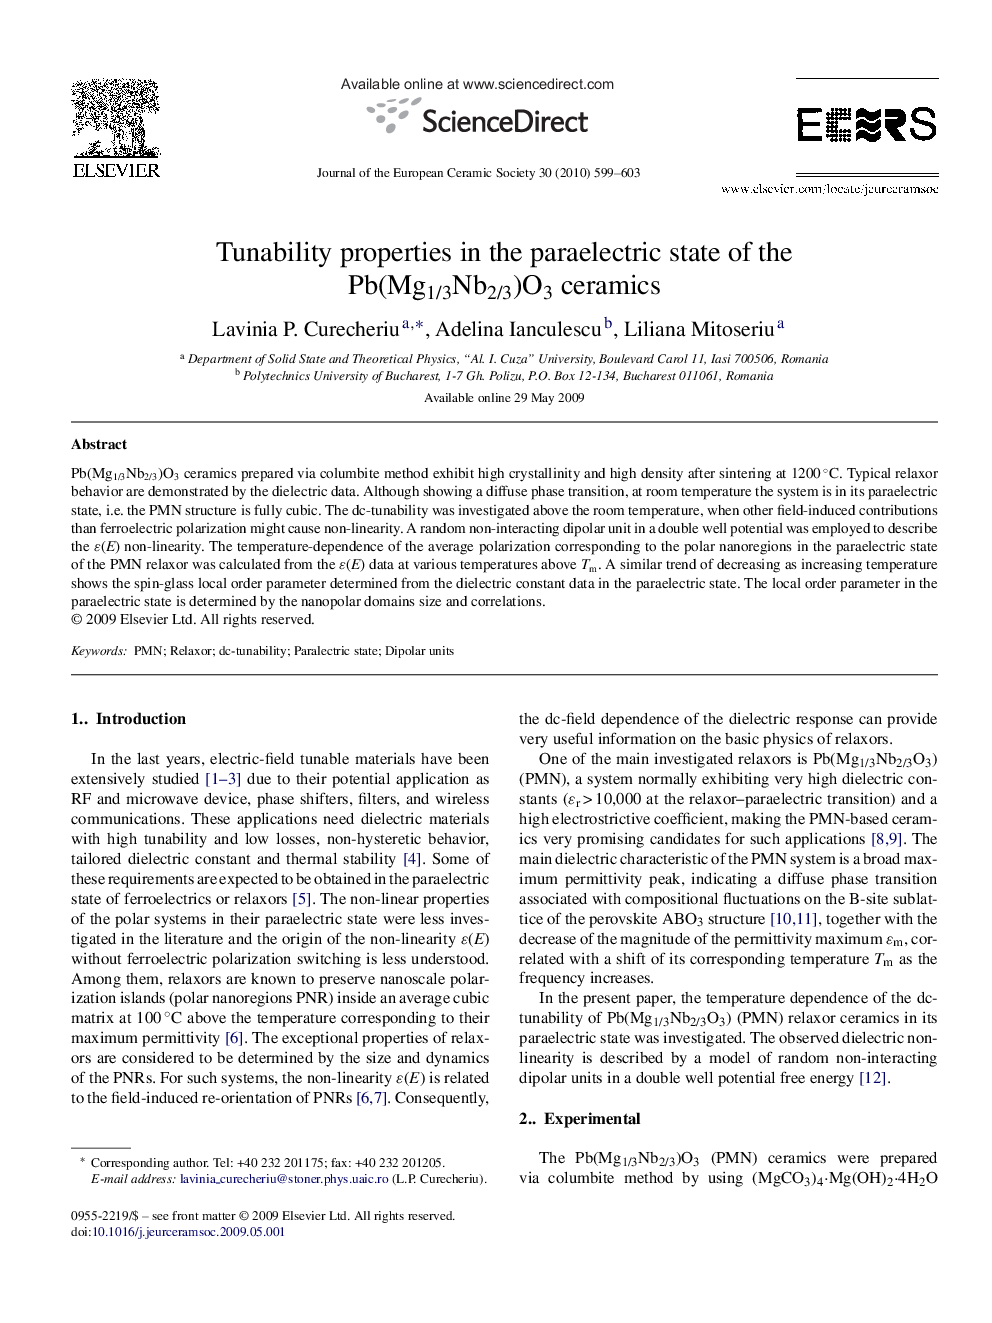 Tunability properties in the paraelectric state of the Pb(Mg1/3Nb2/3)O3 ceramics